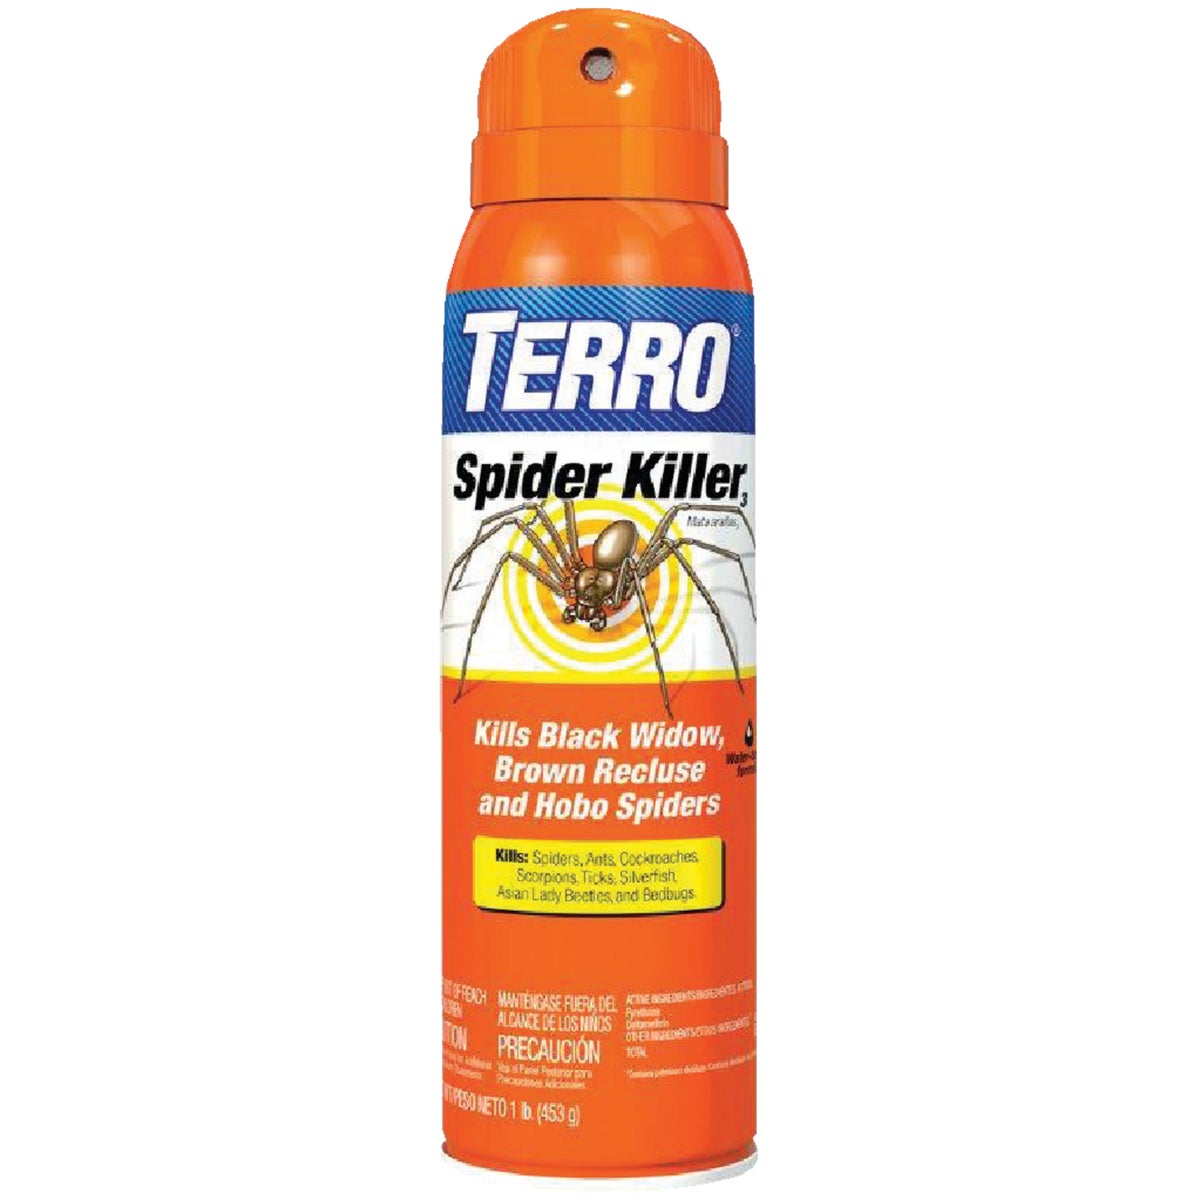 Item 735711, Kills and repels Hobo spiders, black widow spiders, brown recluse spiders, 